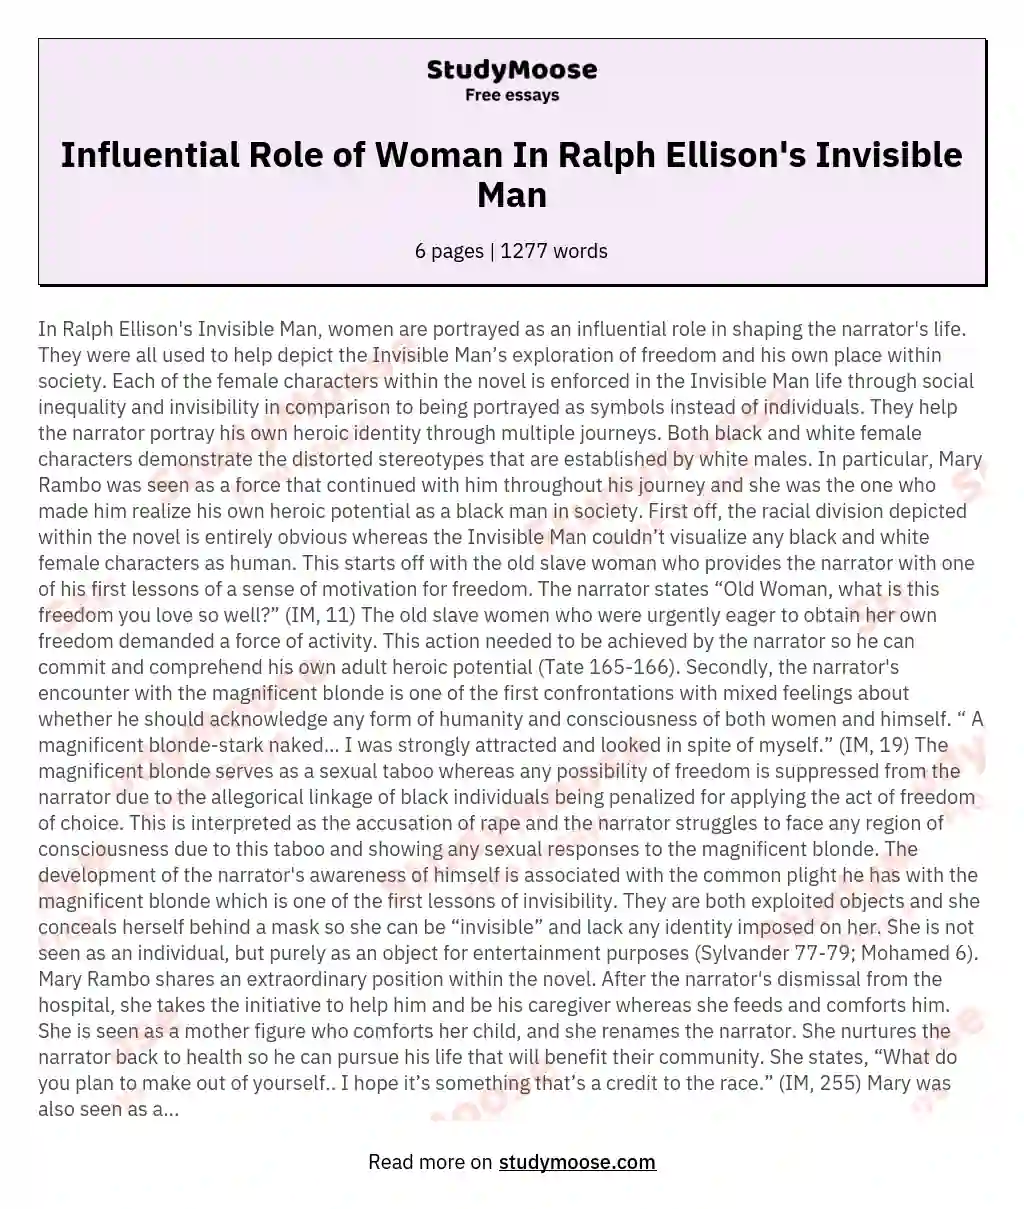 Influential Role of Woman In Ralph Ellison's Invisible Man essay